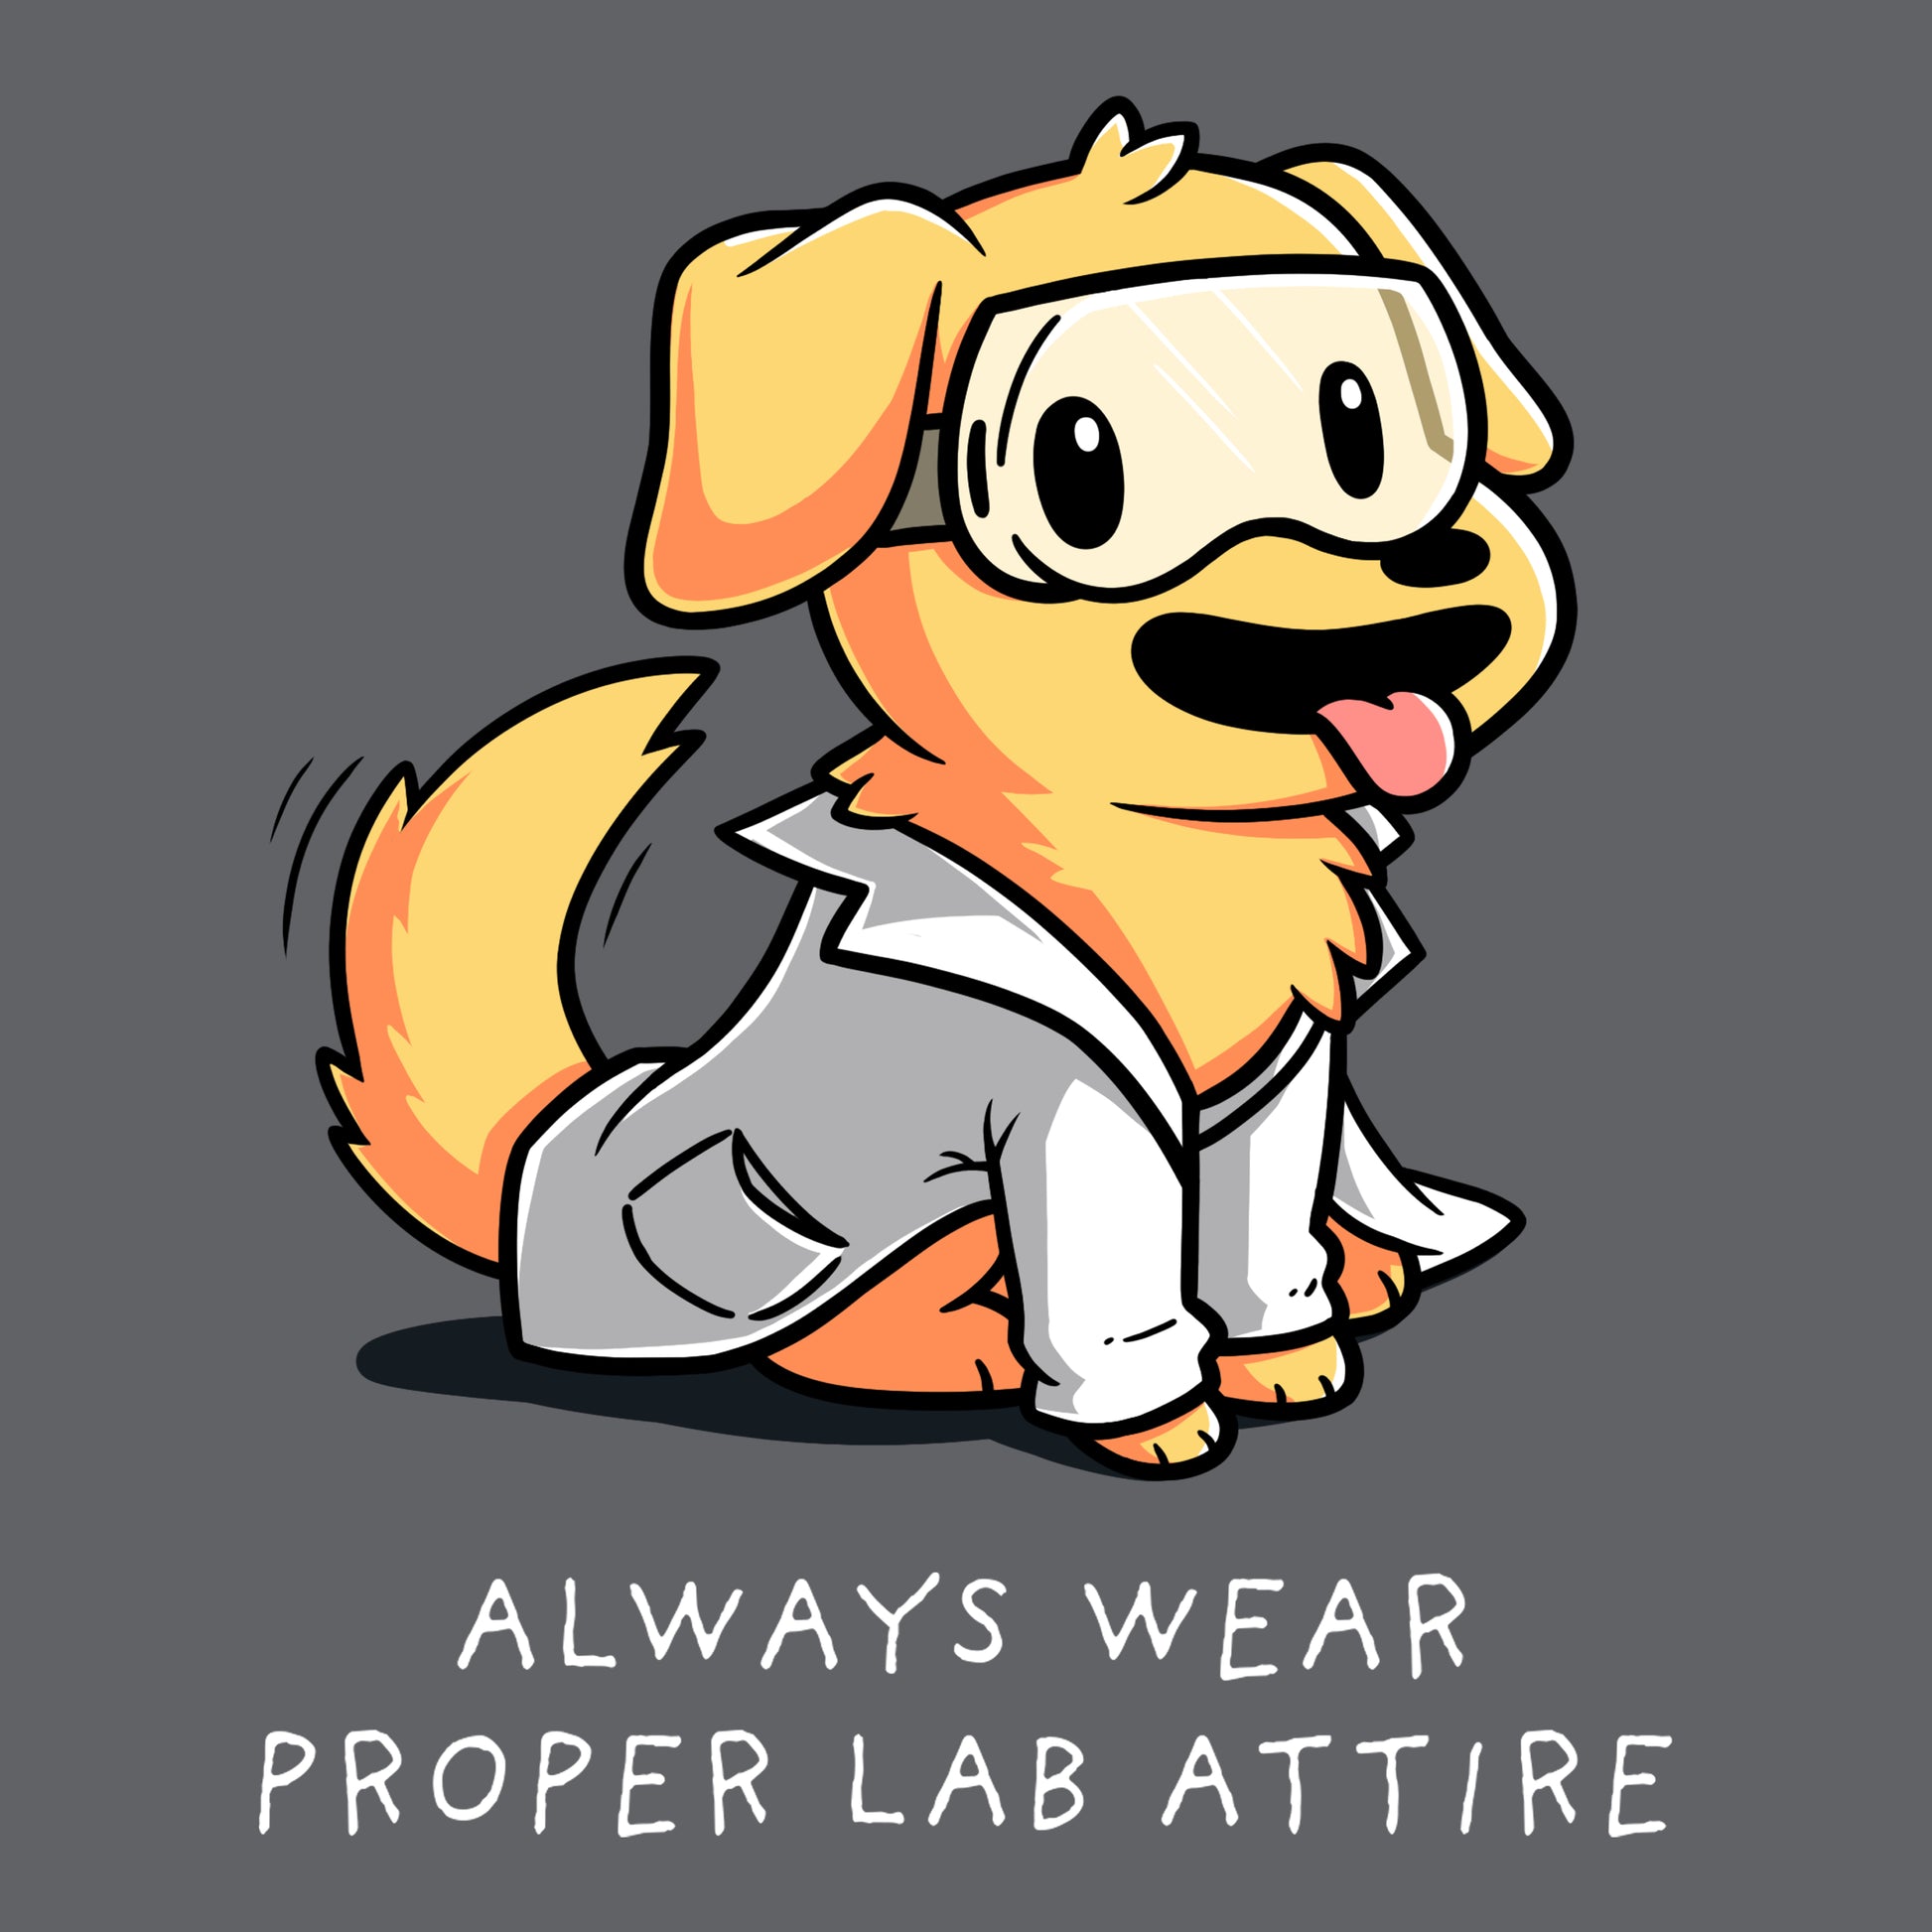 Cartoon dog wearing safety goggles and a lab coat, with the text "Always Wear Proper Lab Attire" below, printed on a super soft ringspun cotton Lab Attire T-shirt by monsterdigital in charcoal gray.